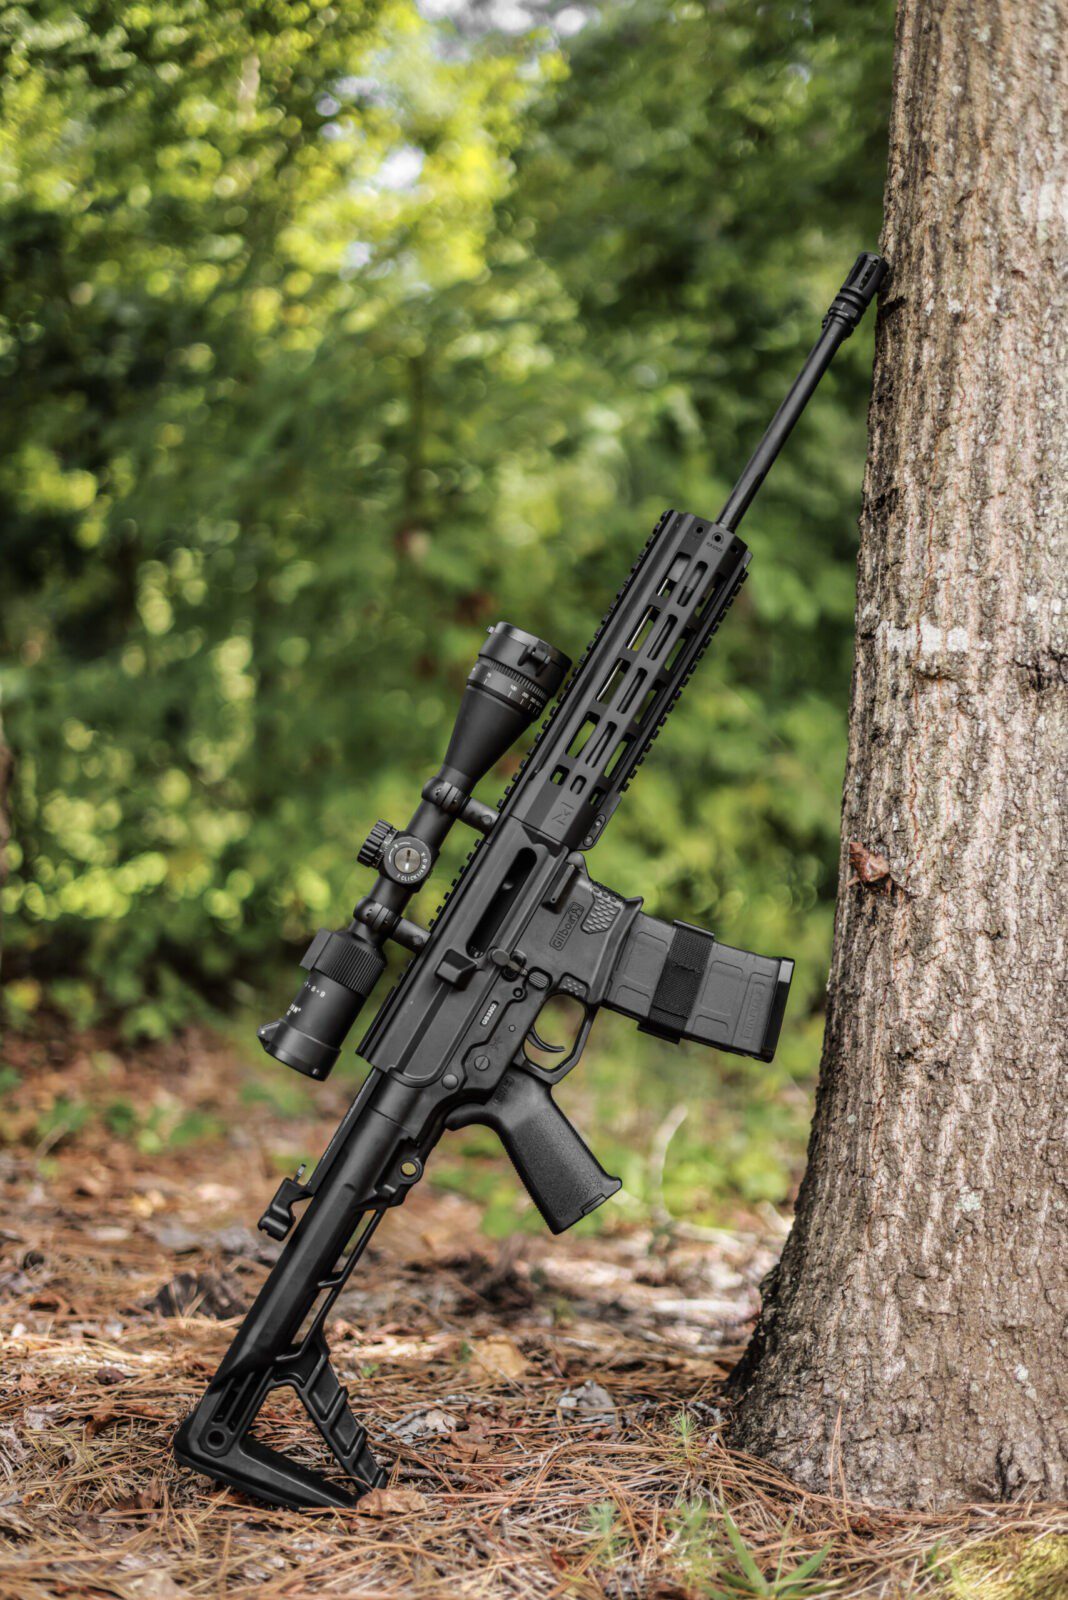 DBR Snake - Double barrel AR15 Rifle in the woods